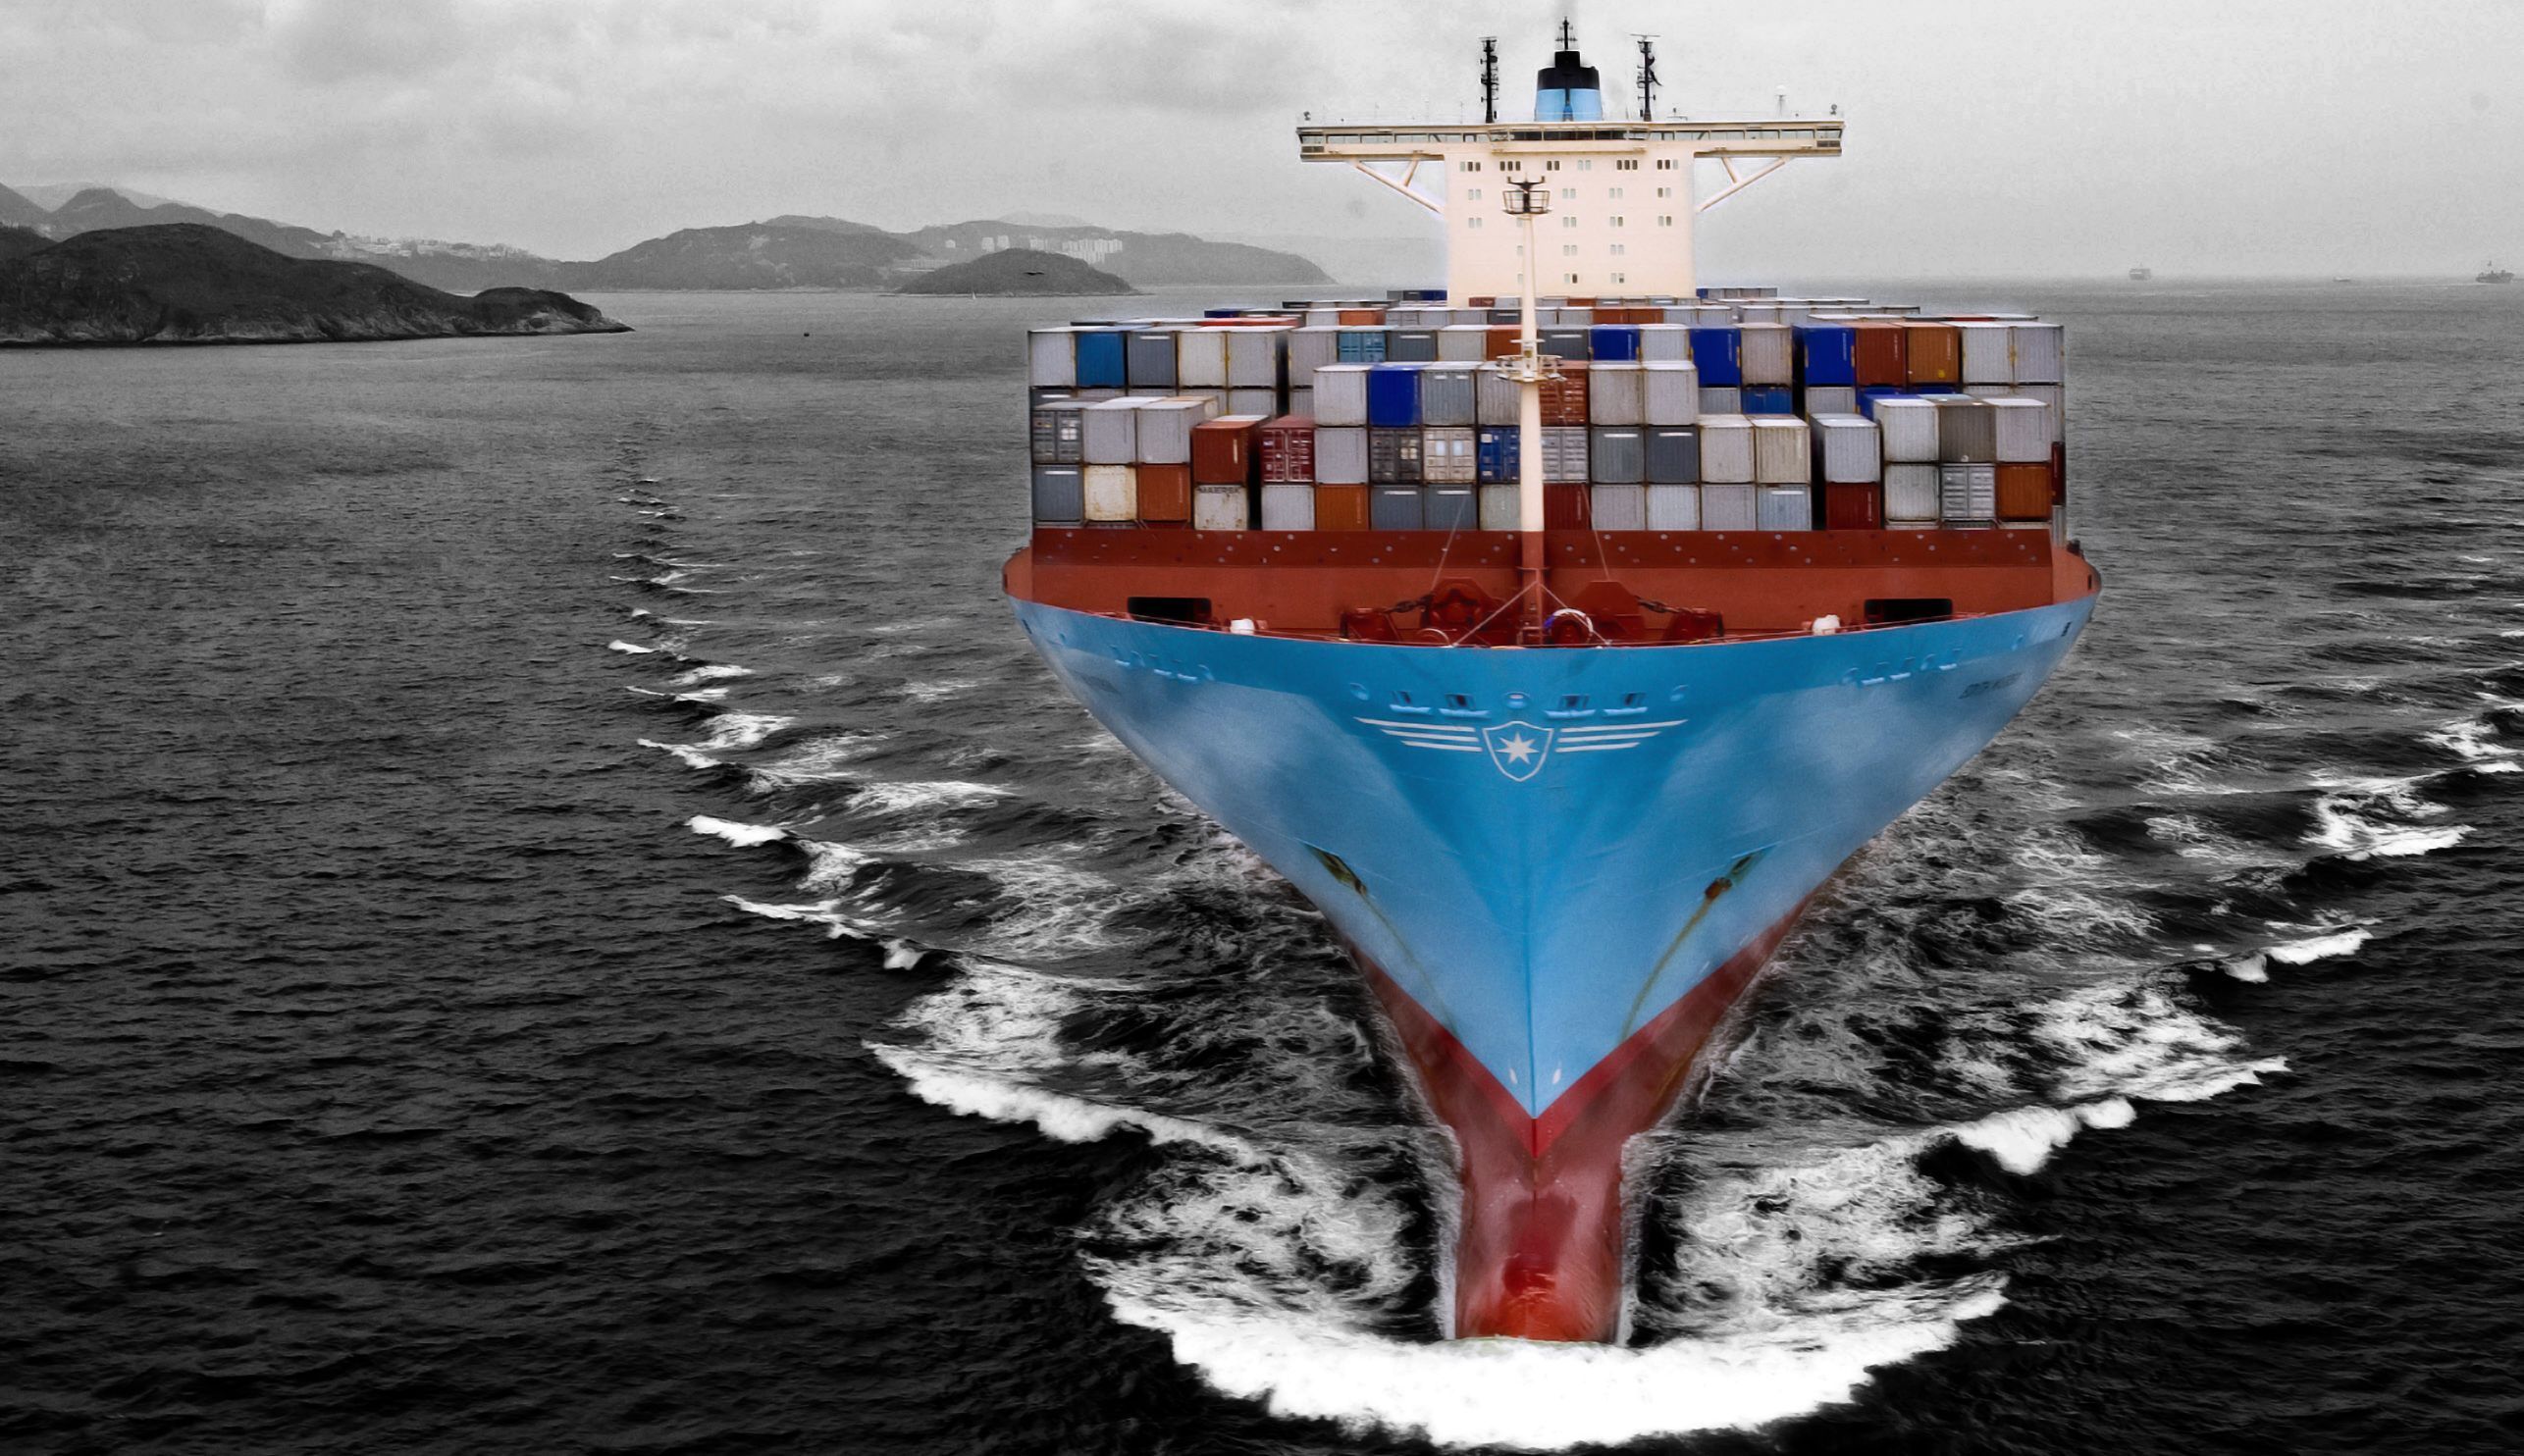 Container Ship Wallpaper. Popcorn Container Wallpaper, Container Yard Wallpaper and Freightliner Container Wallpaper